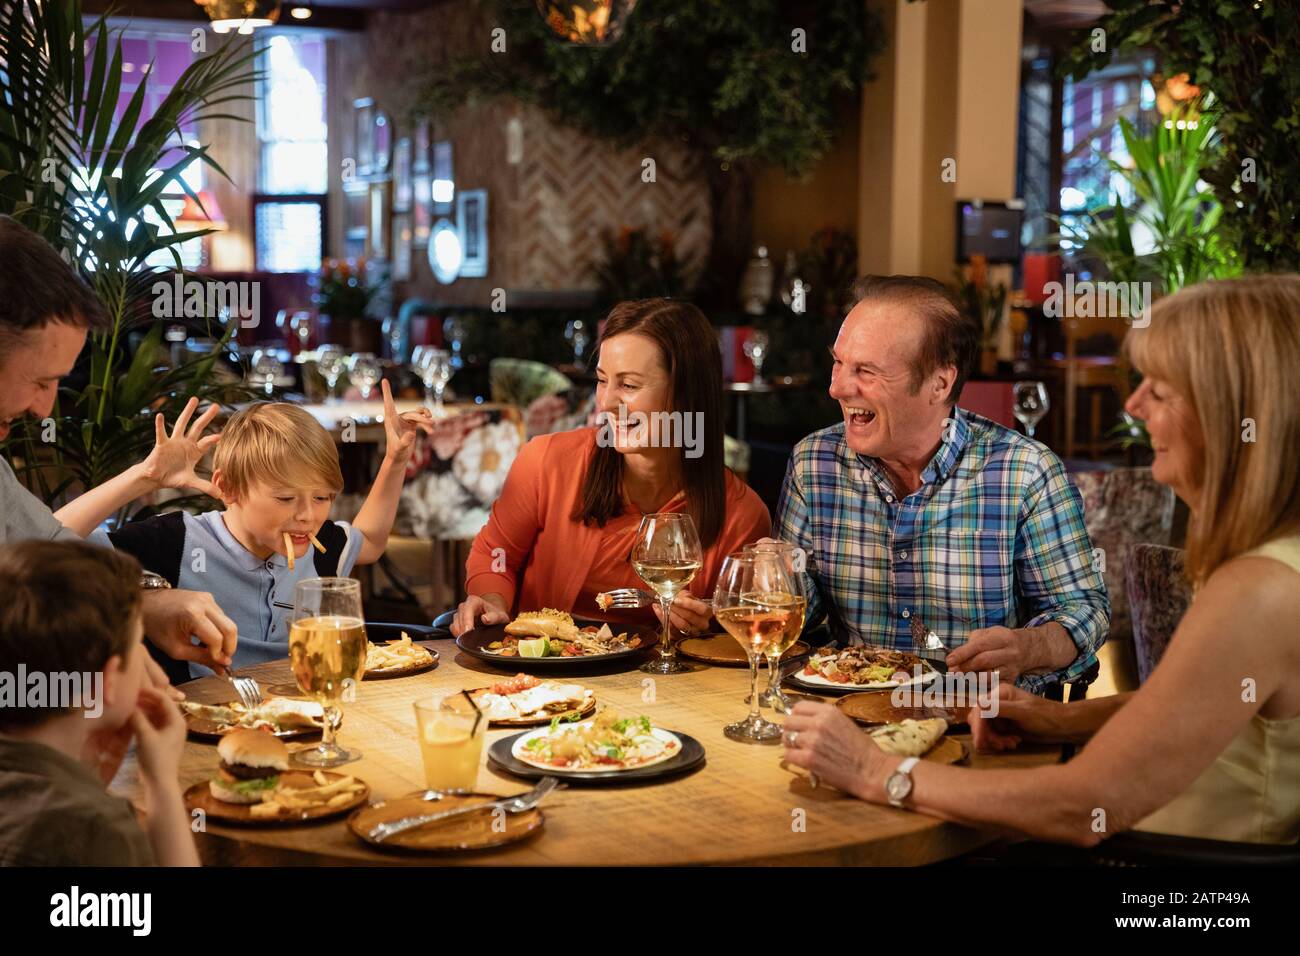 A family having a meal at a restaurant. A young boy is making them all laugh by making a face using food. Stock Photo